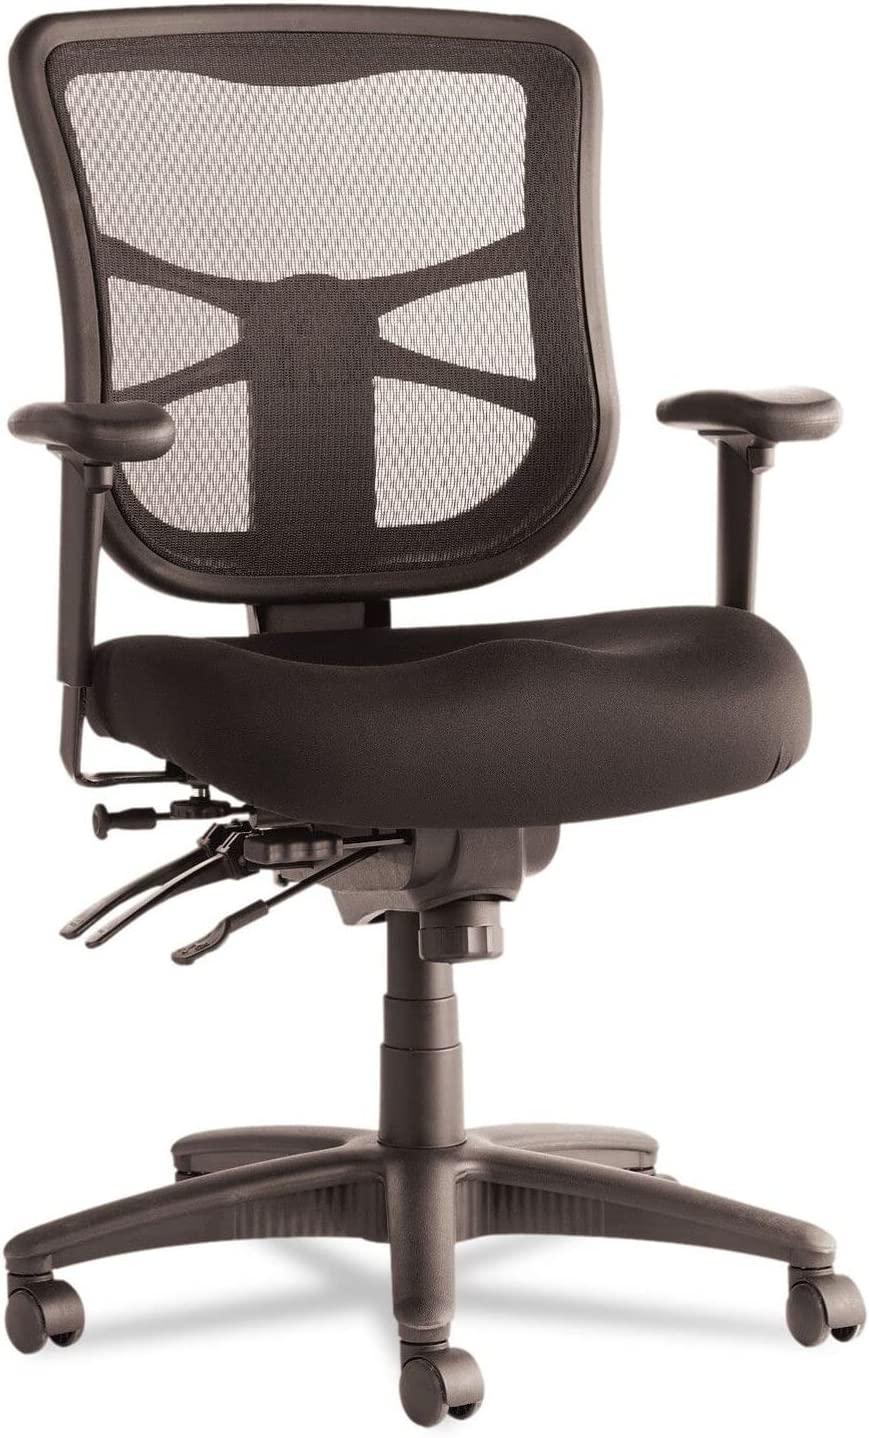 Alera Elusion Best office chair for tailbone pain